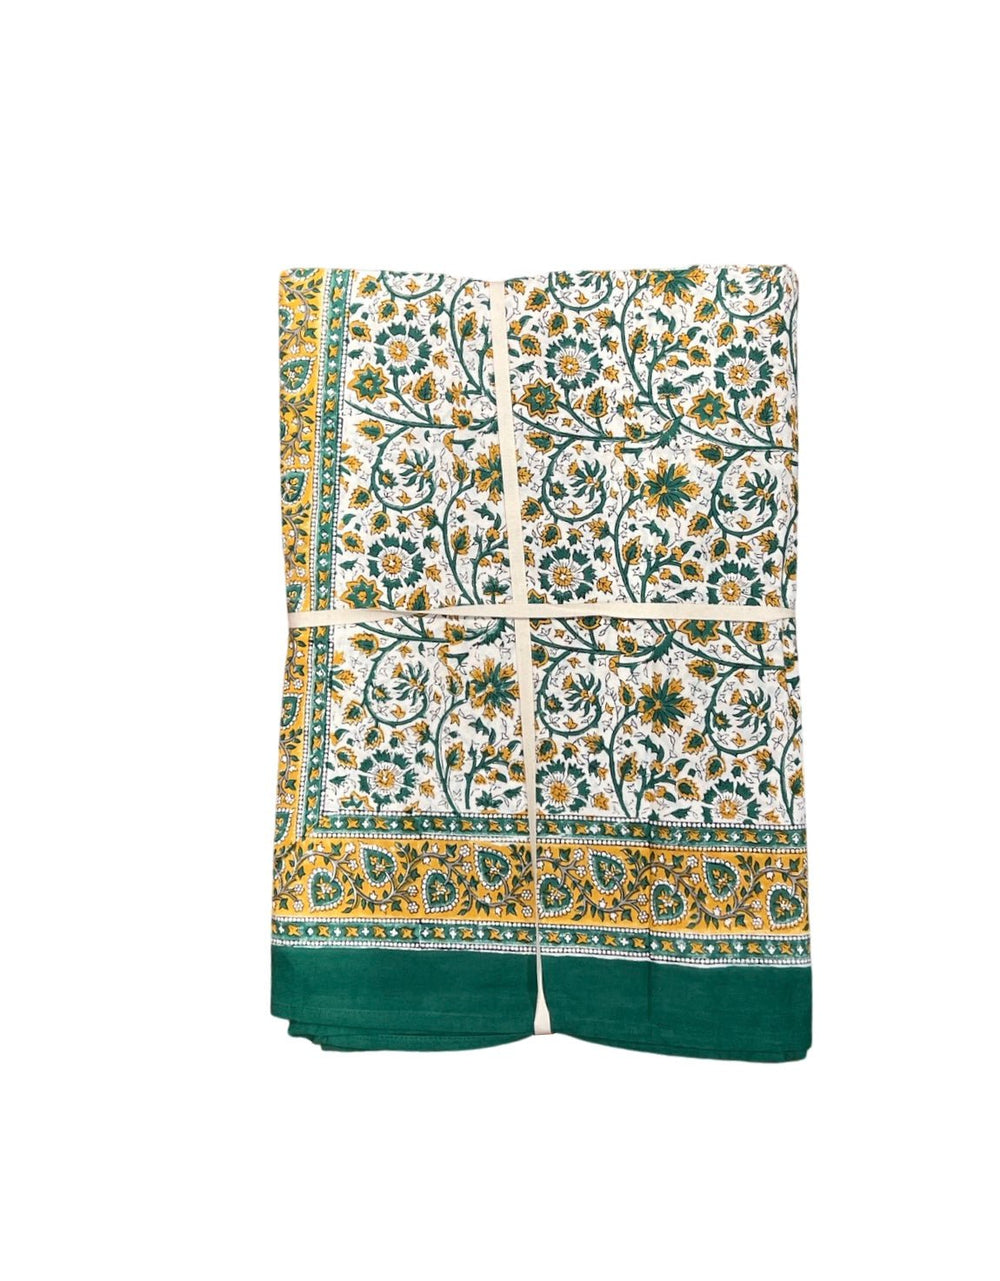 Beau & Ro Tablecloth Beau & Ro Tabletop Collection | Green Blockprint Tablecloth